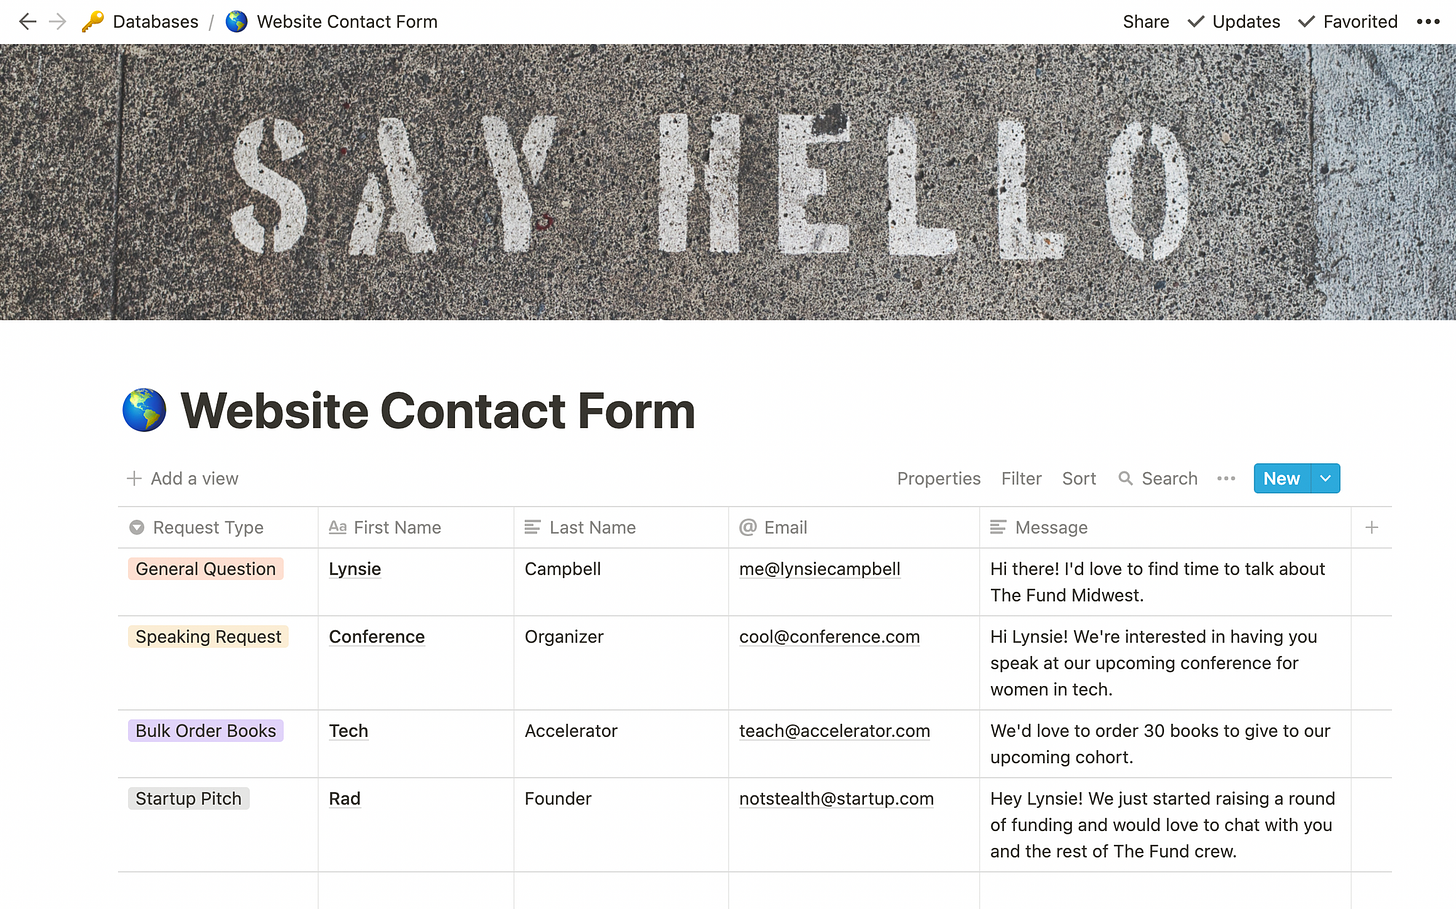 How To Create a Simple Workflow to Automate Your Website Contact Form